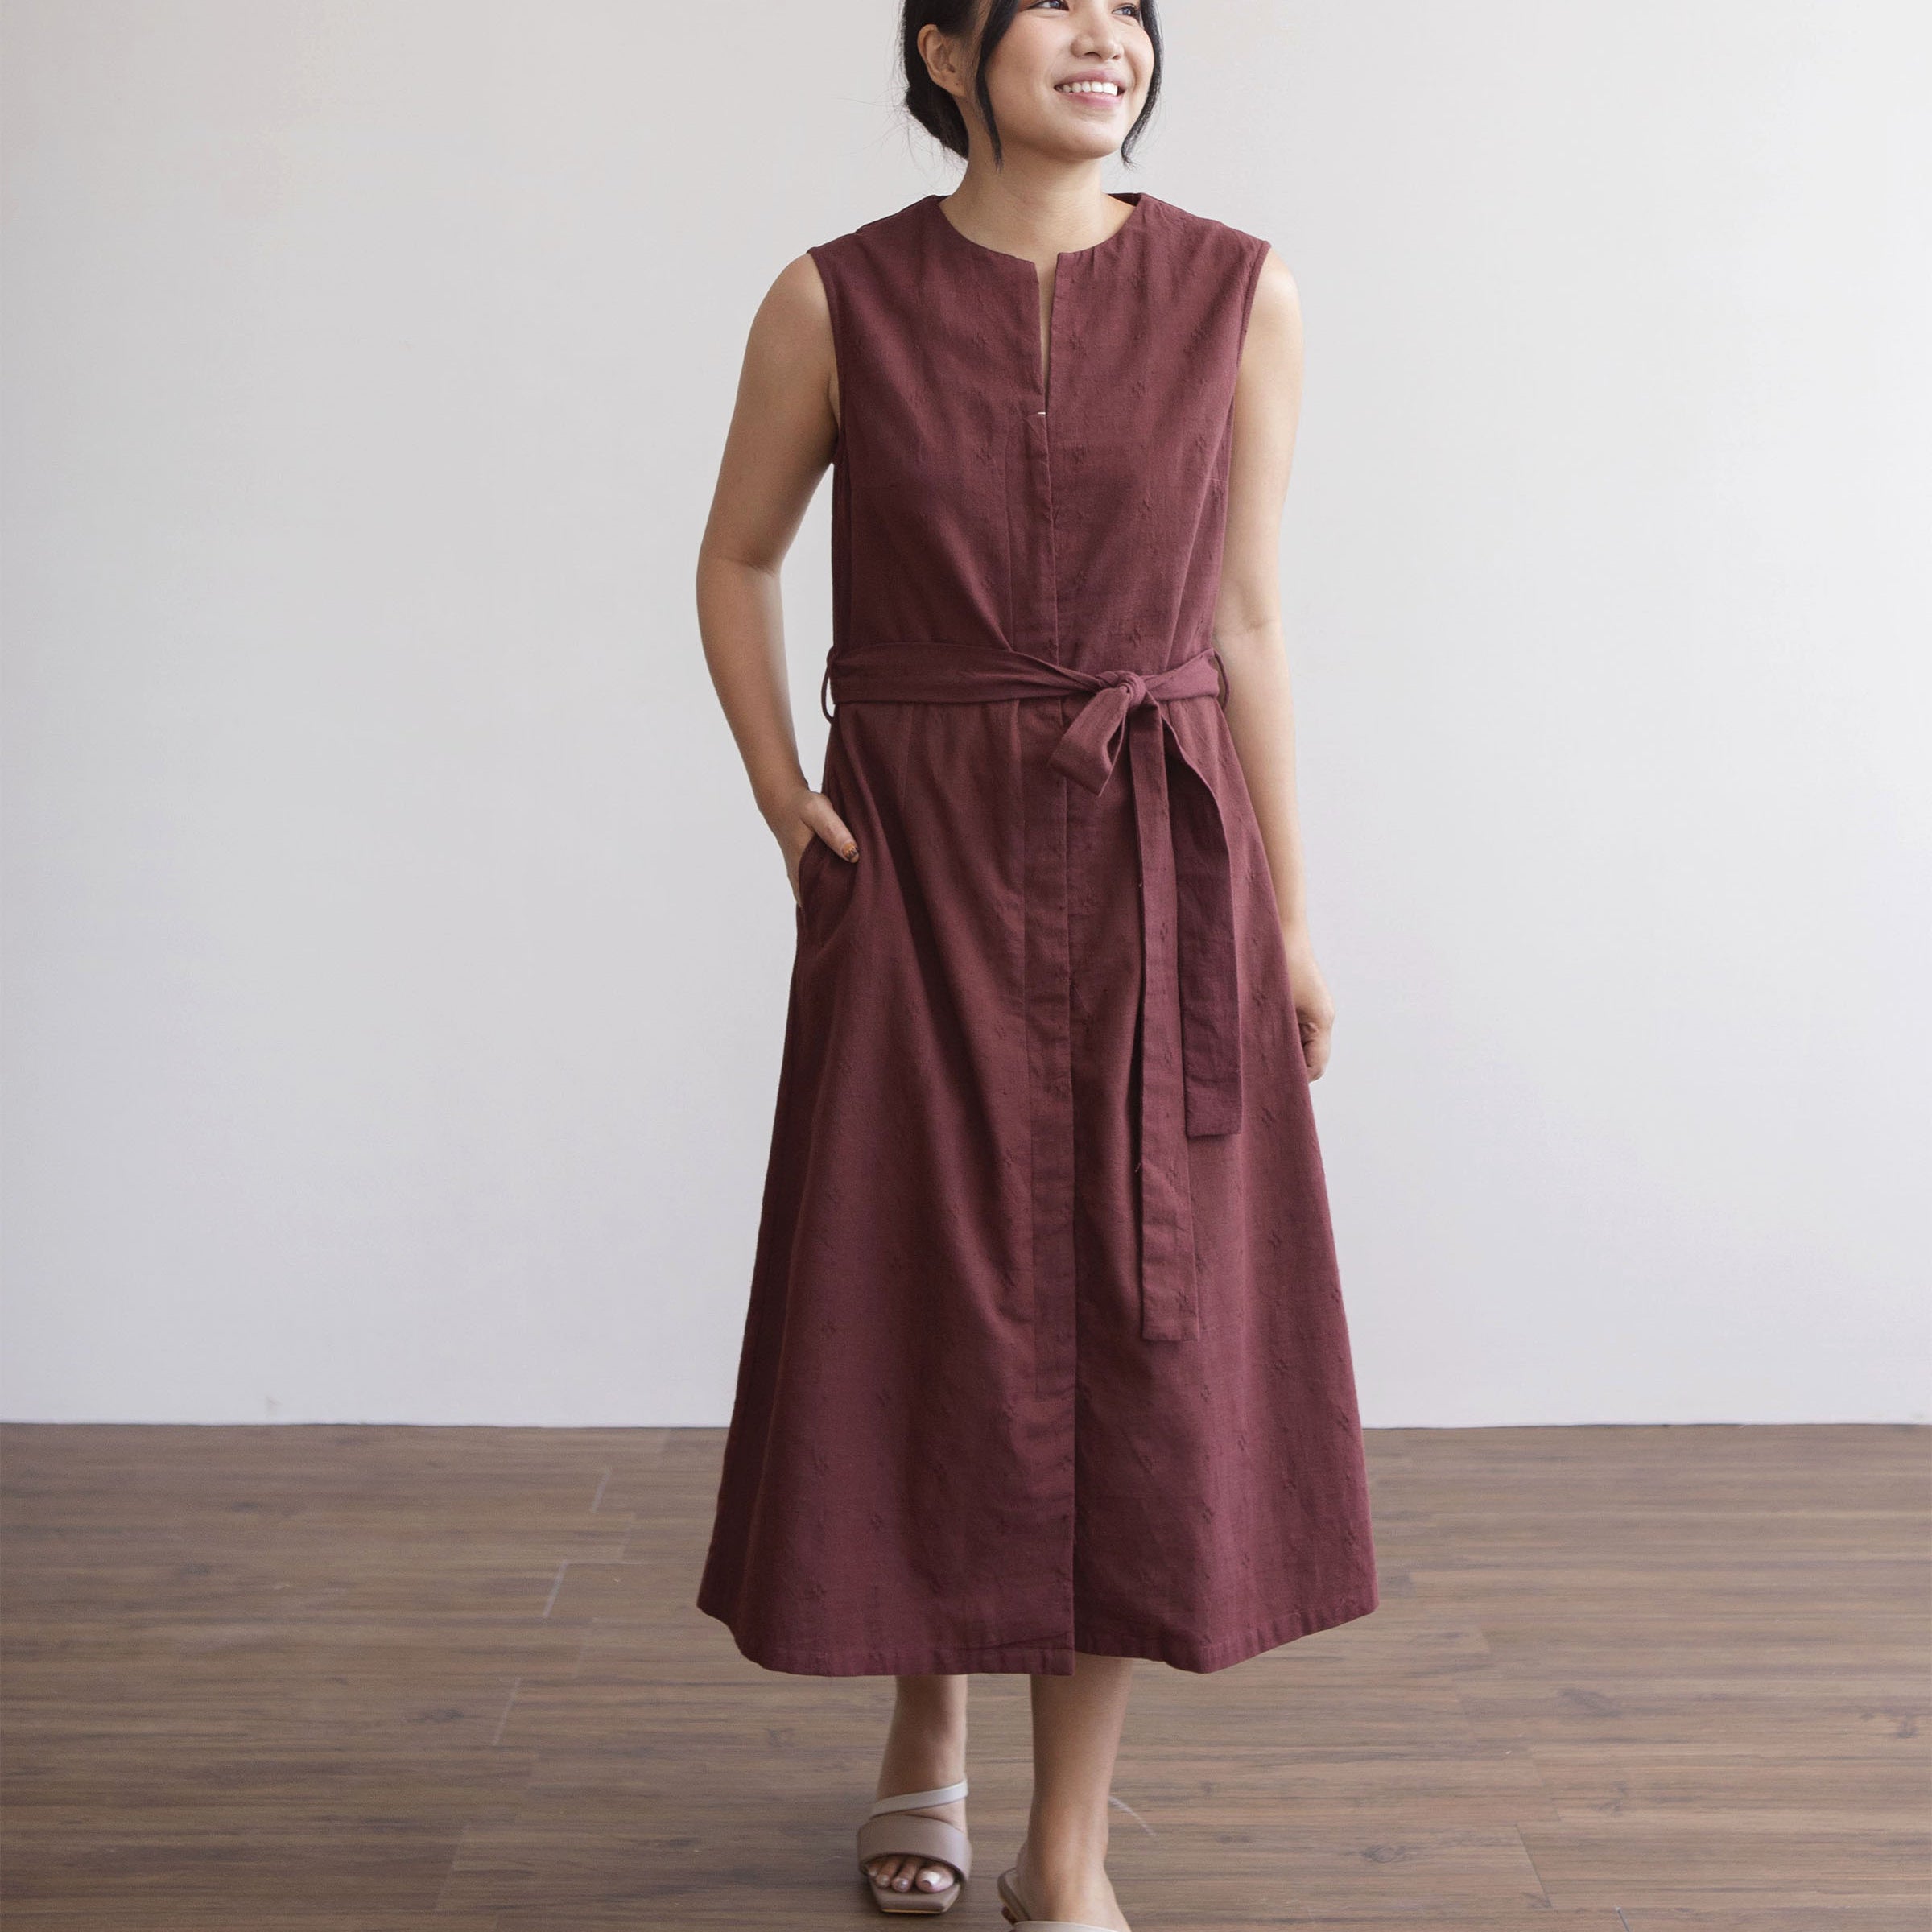 Comfortable dress with pockets